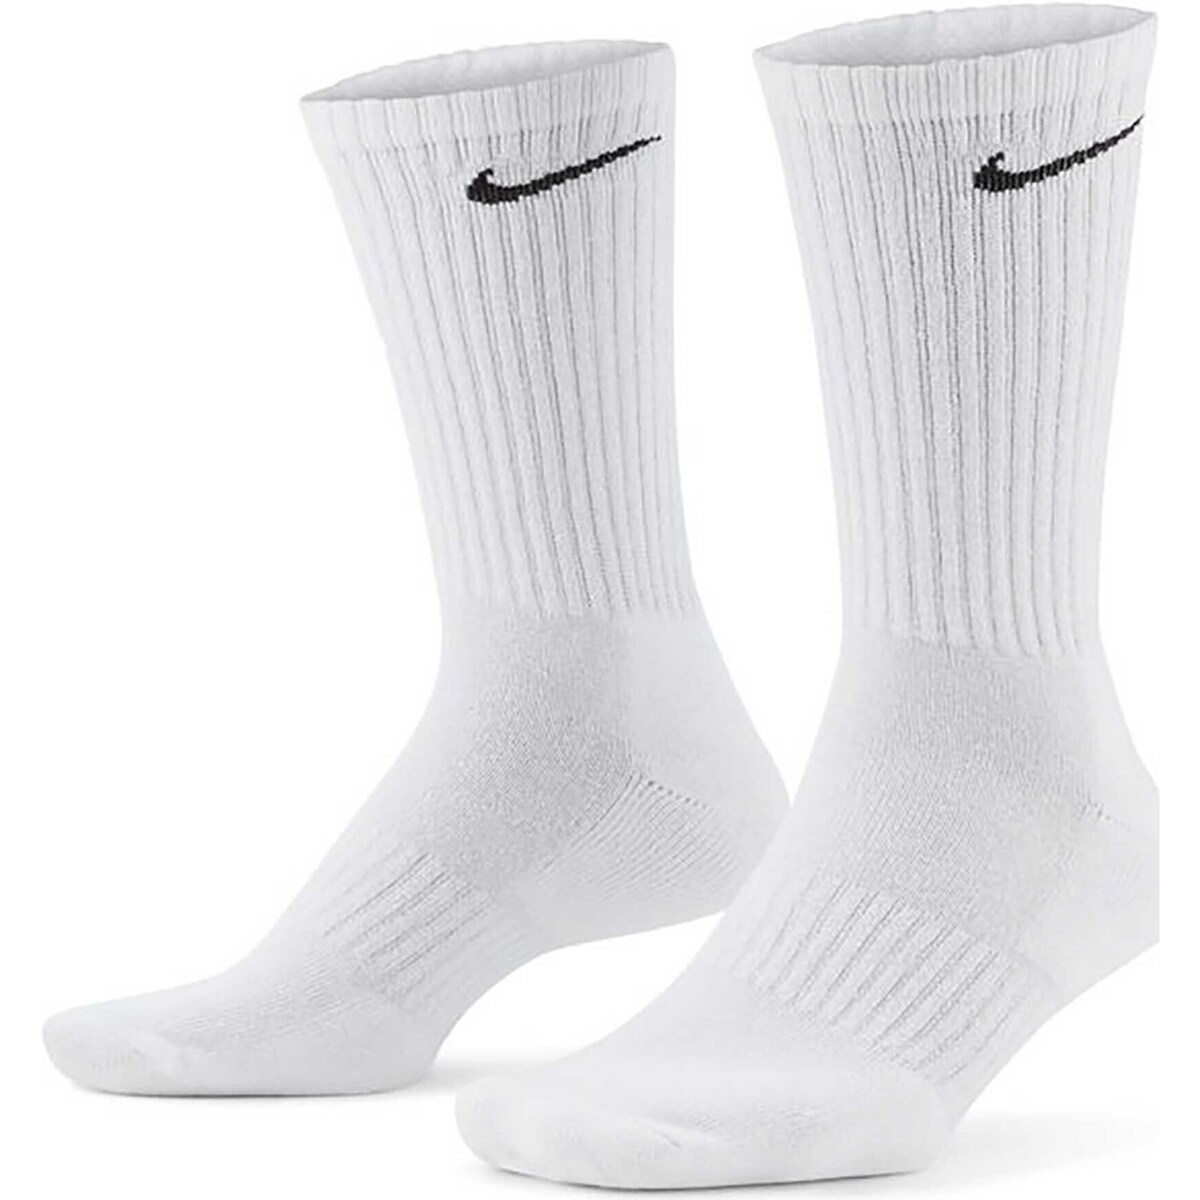 Nike Blanc Calze Everyday Cushion Crew 3Pack no3CcxHh